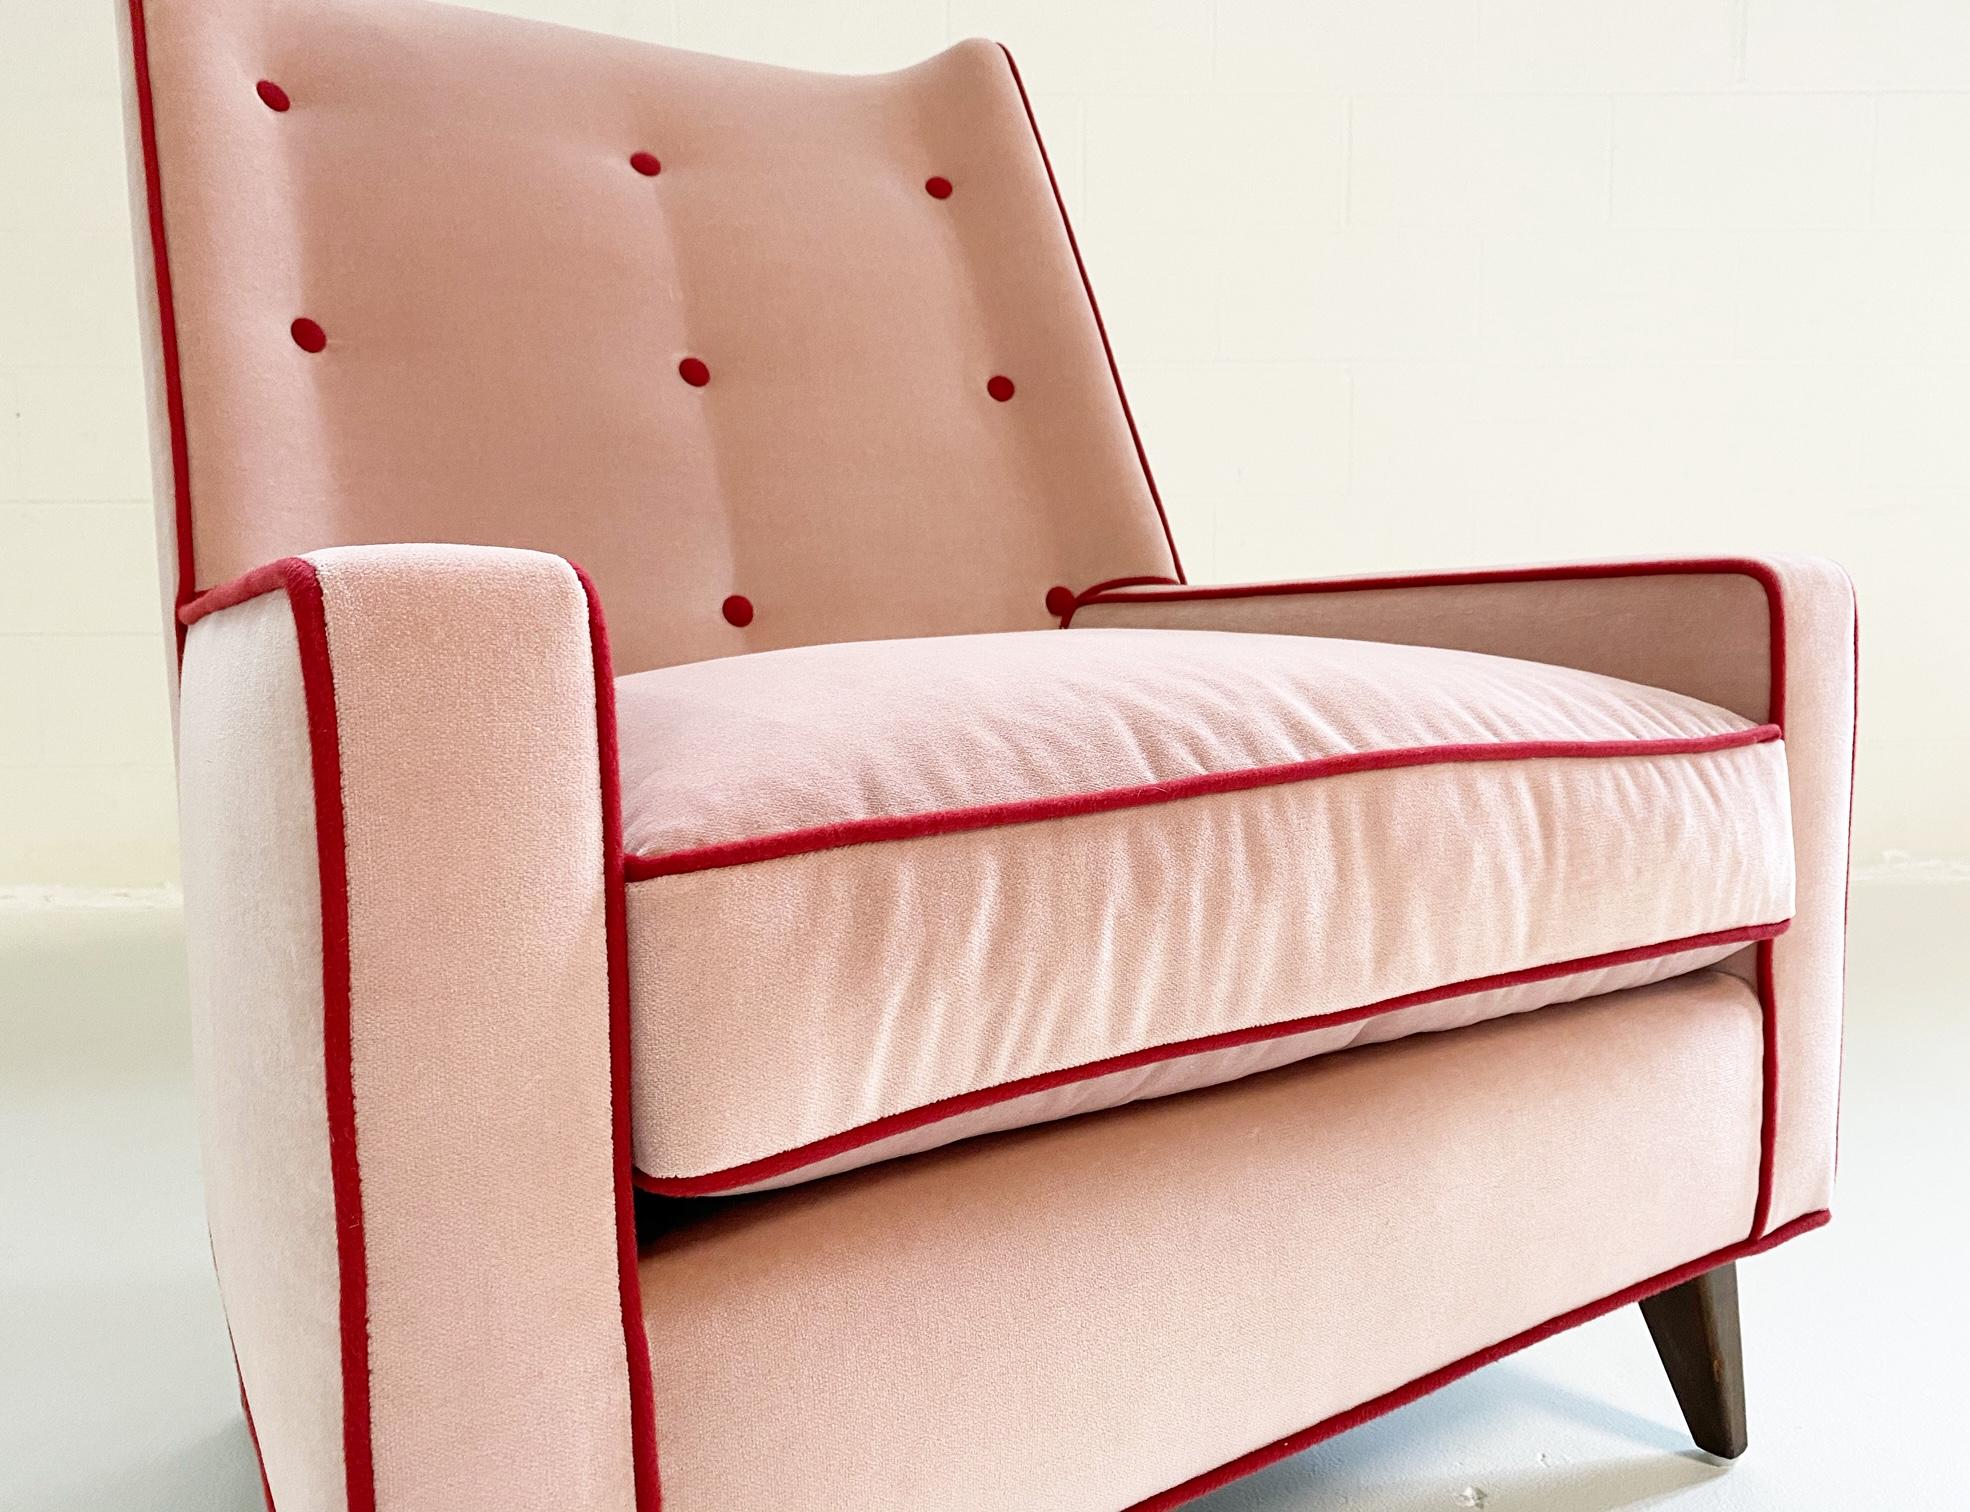 Completely restored and masterfully reupholstered in Schumacher's Hardy but smooth Rocky Performance velvet, this McCobb high back lounge chair is ready and waiting for your beautiful room. We paired the blush velvet with the high contrast, softer